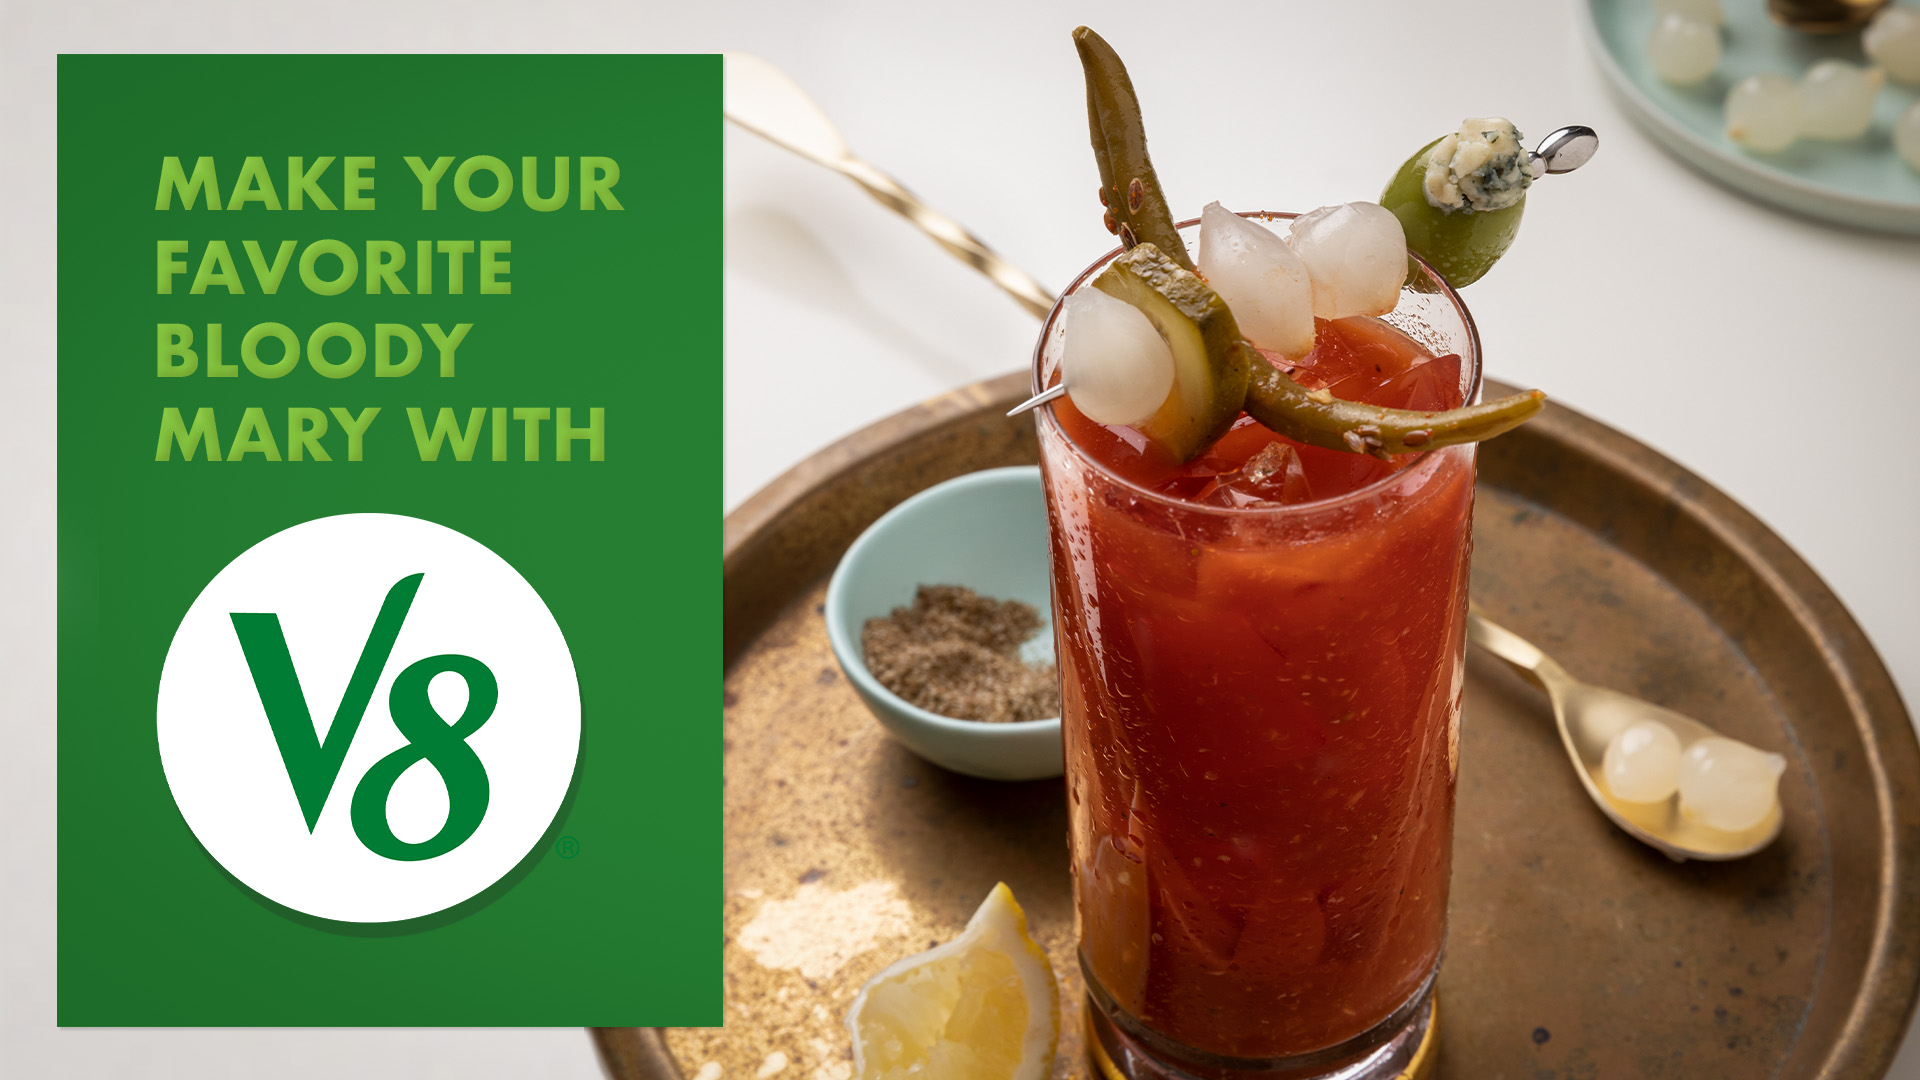 Make your favorite bloody mary with V8. Includes photo of Bloody Mary in a glass. 